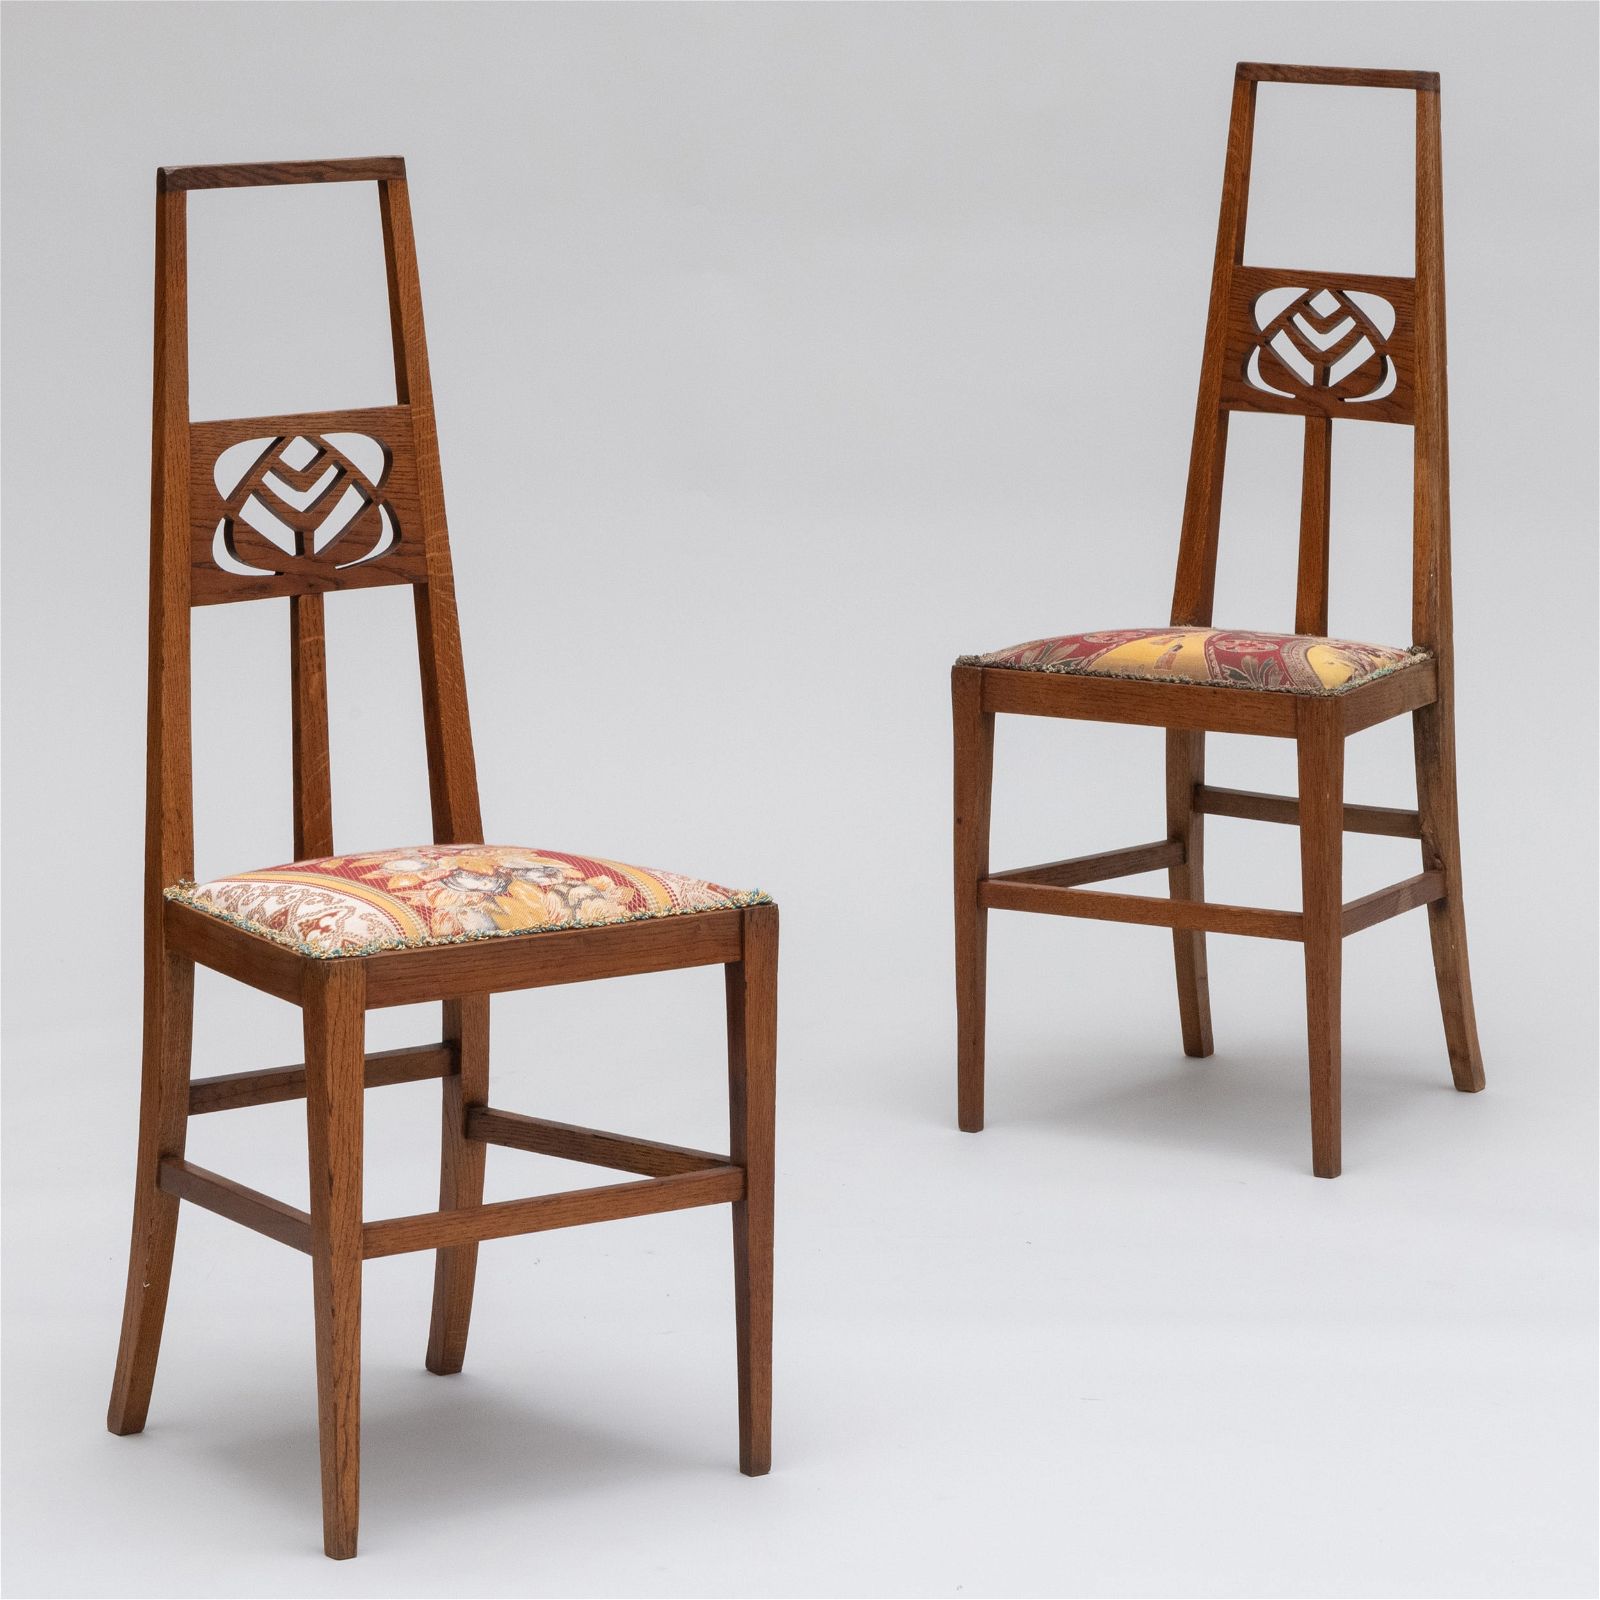 Pair of Arts and Crafts oak hall chairs by E.A. Taylor, estimated at $500-$700 at Stair Galleries.